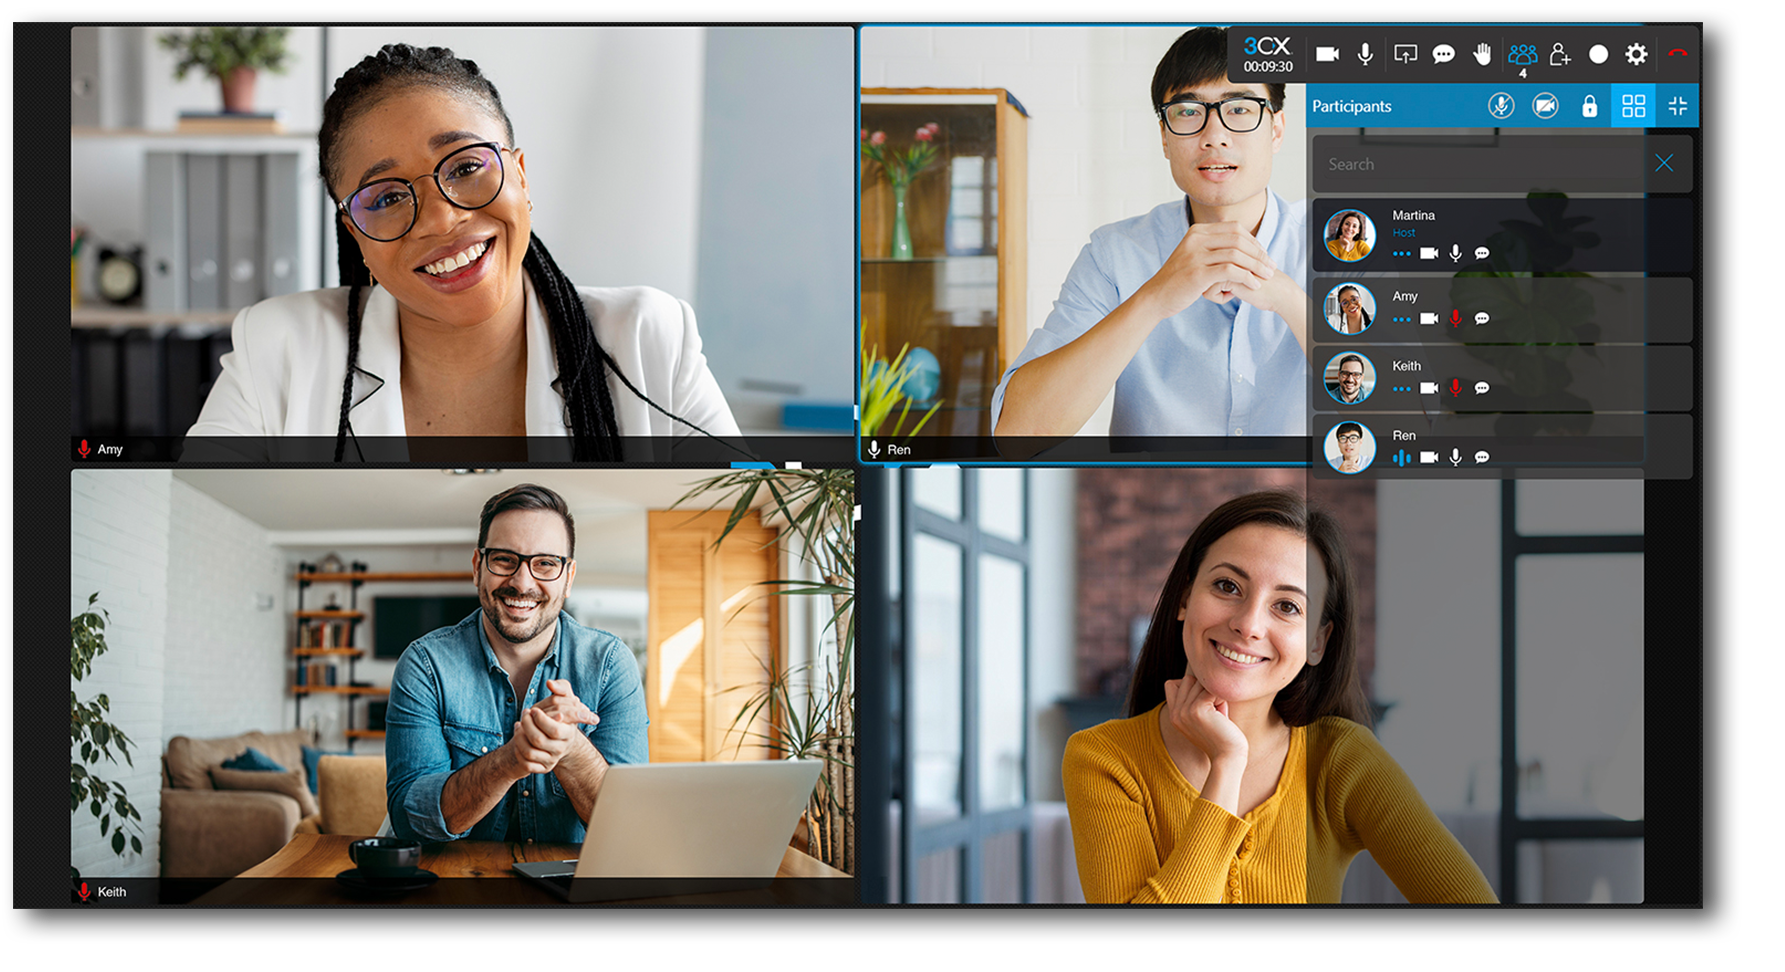 3CX Software - 3CX’s integrated video conferencing is easy to use and enables businesses to save time and money by hosting virtual meetings, whilst enjoying the benefits of face-to-face communication.